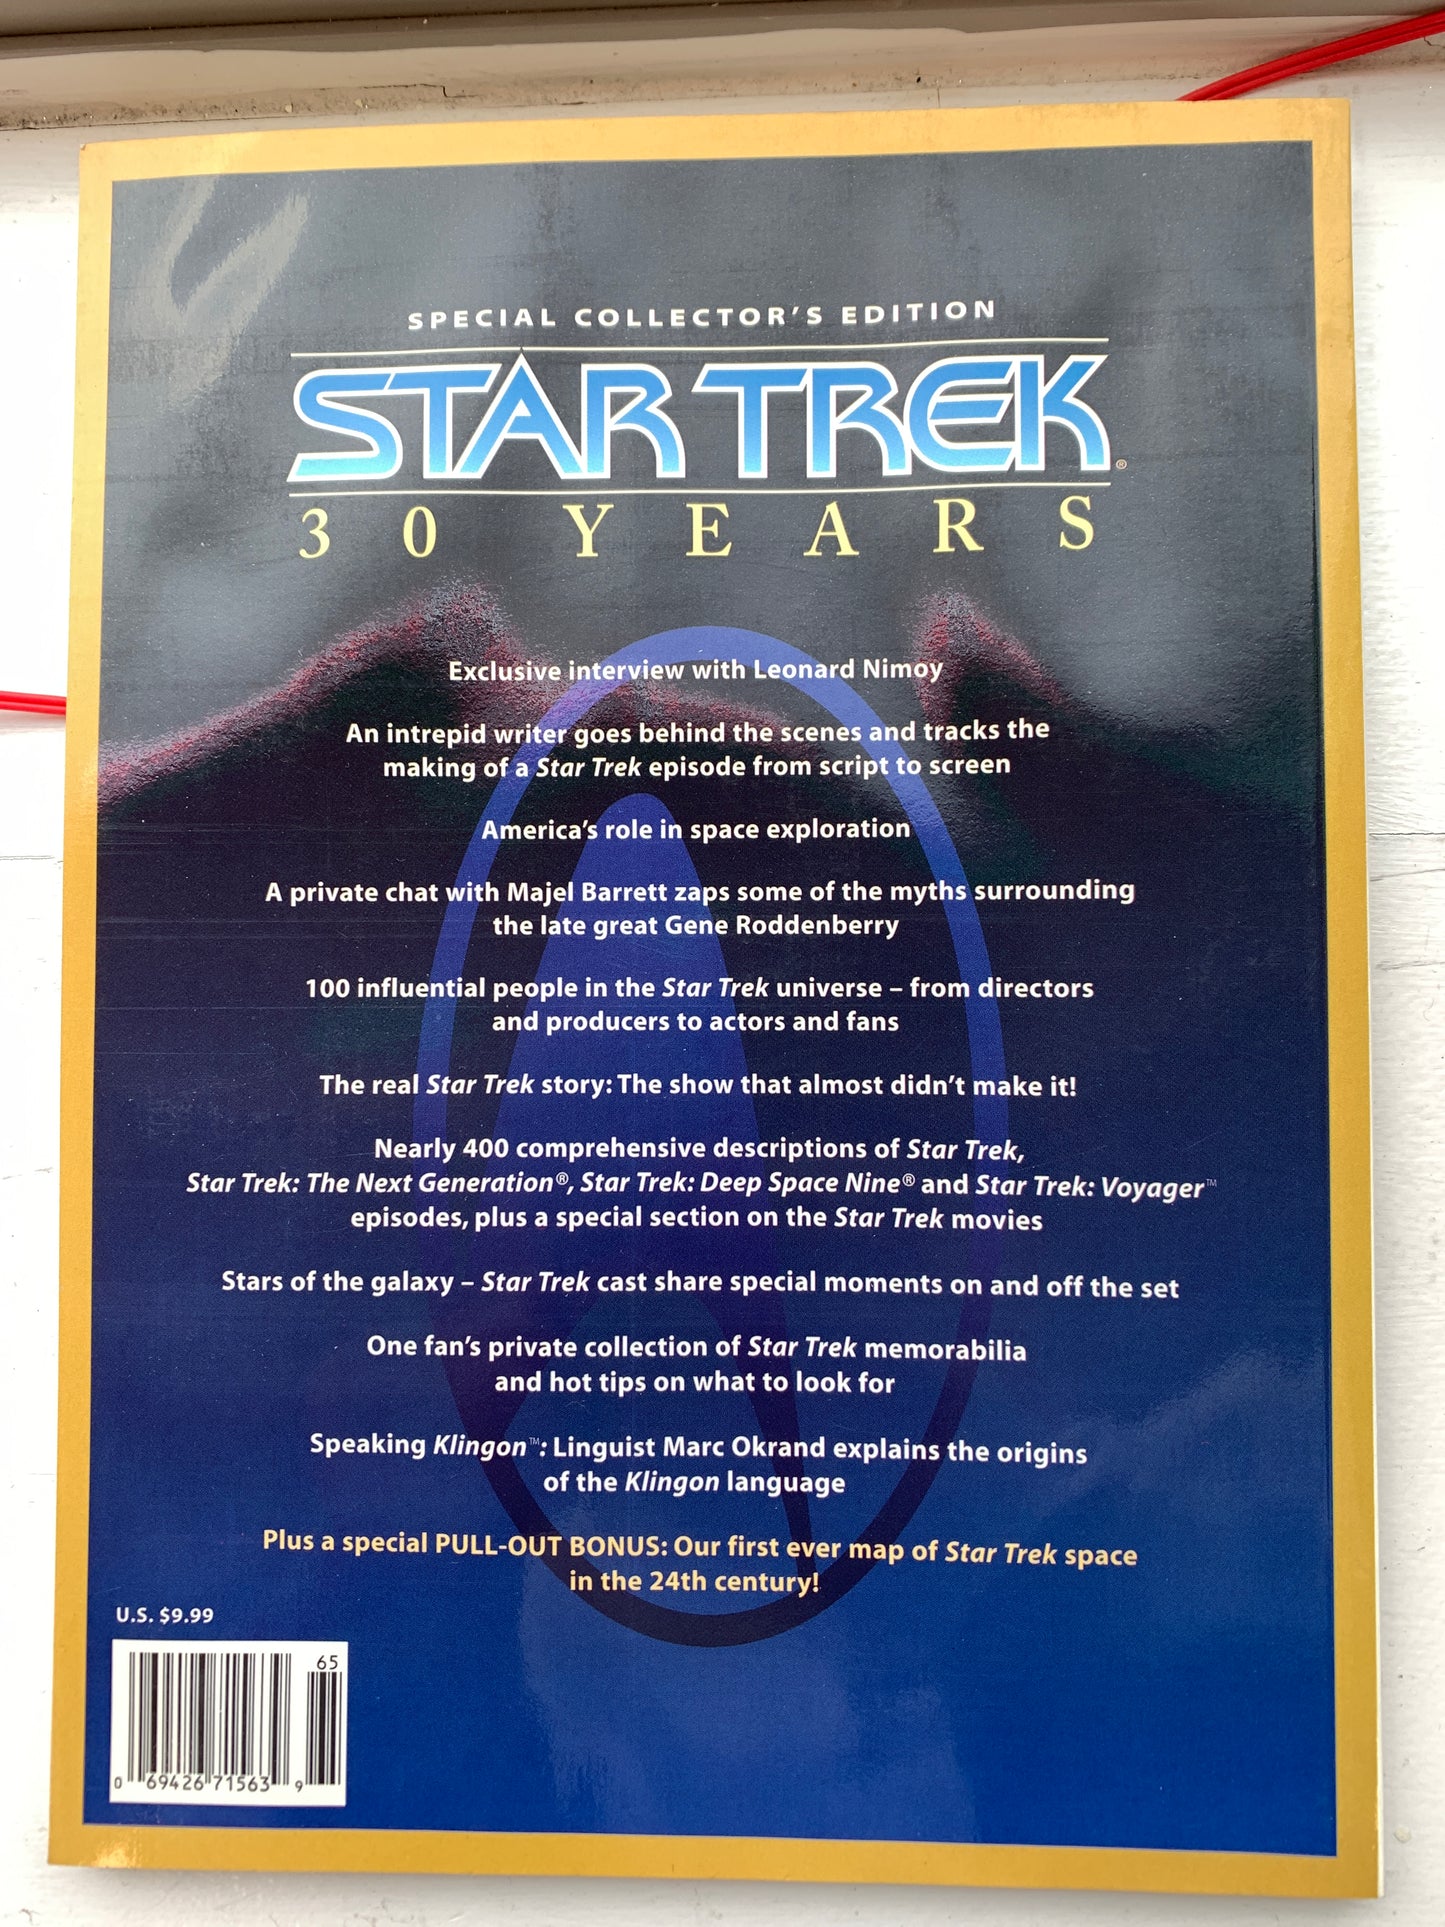 Star Trek Special Collector's Edition 30 Years Book